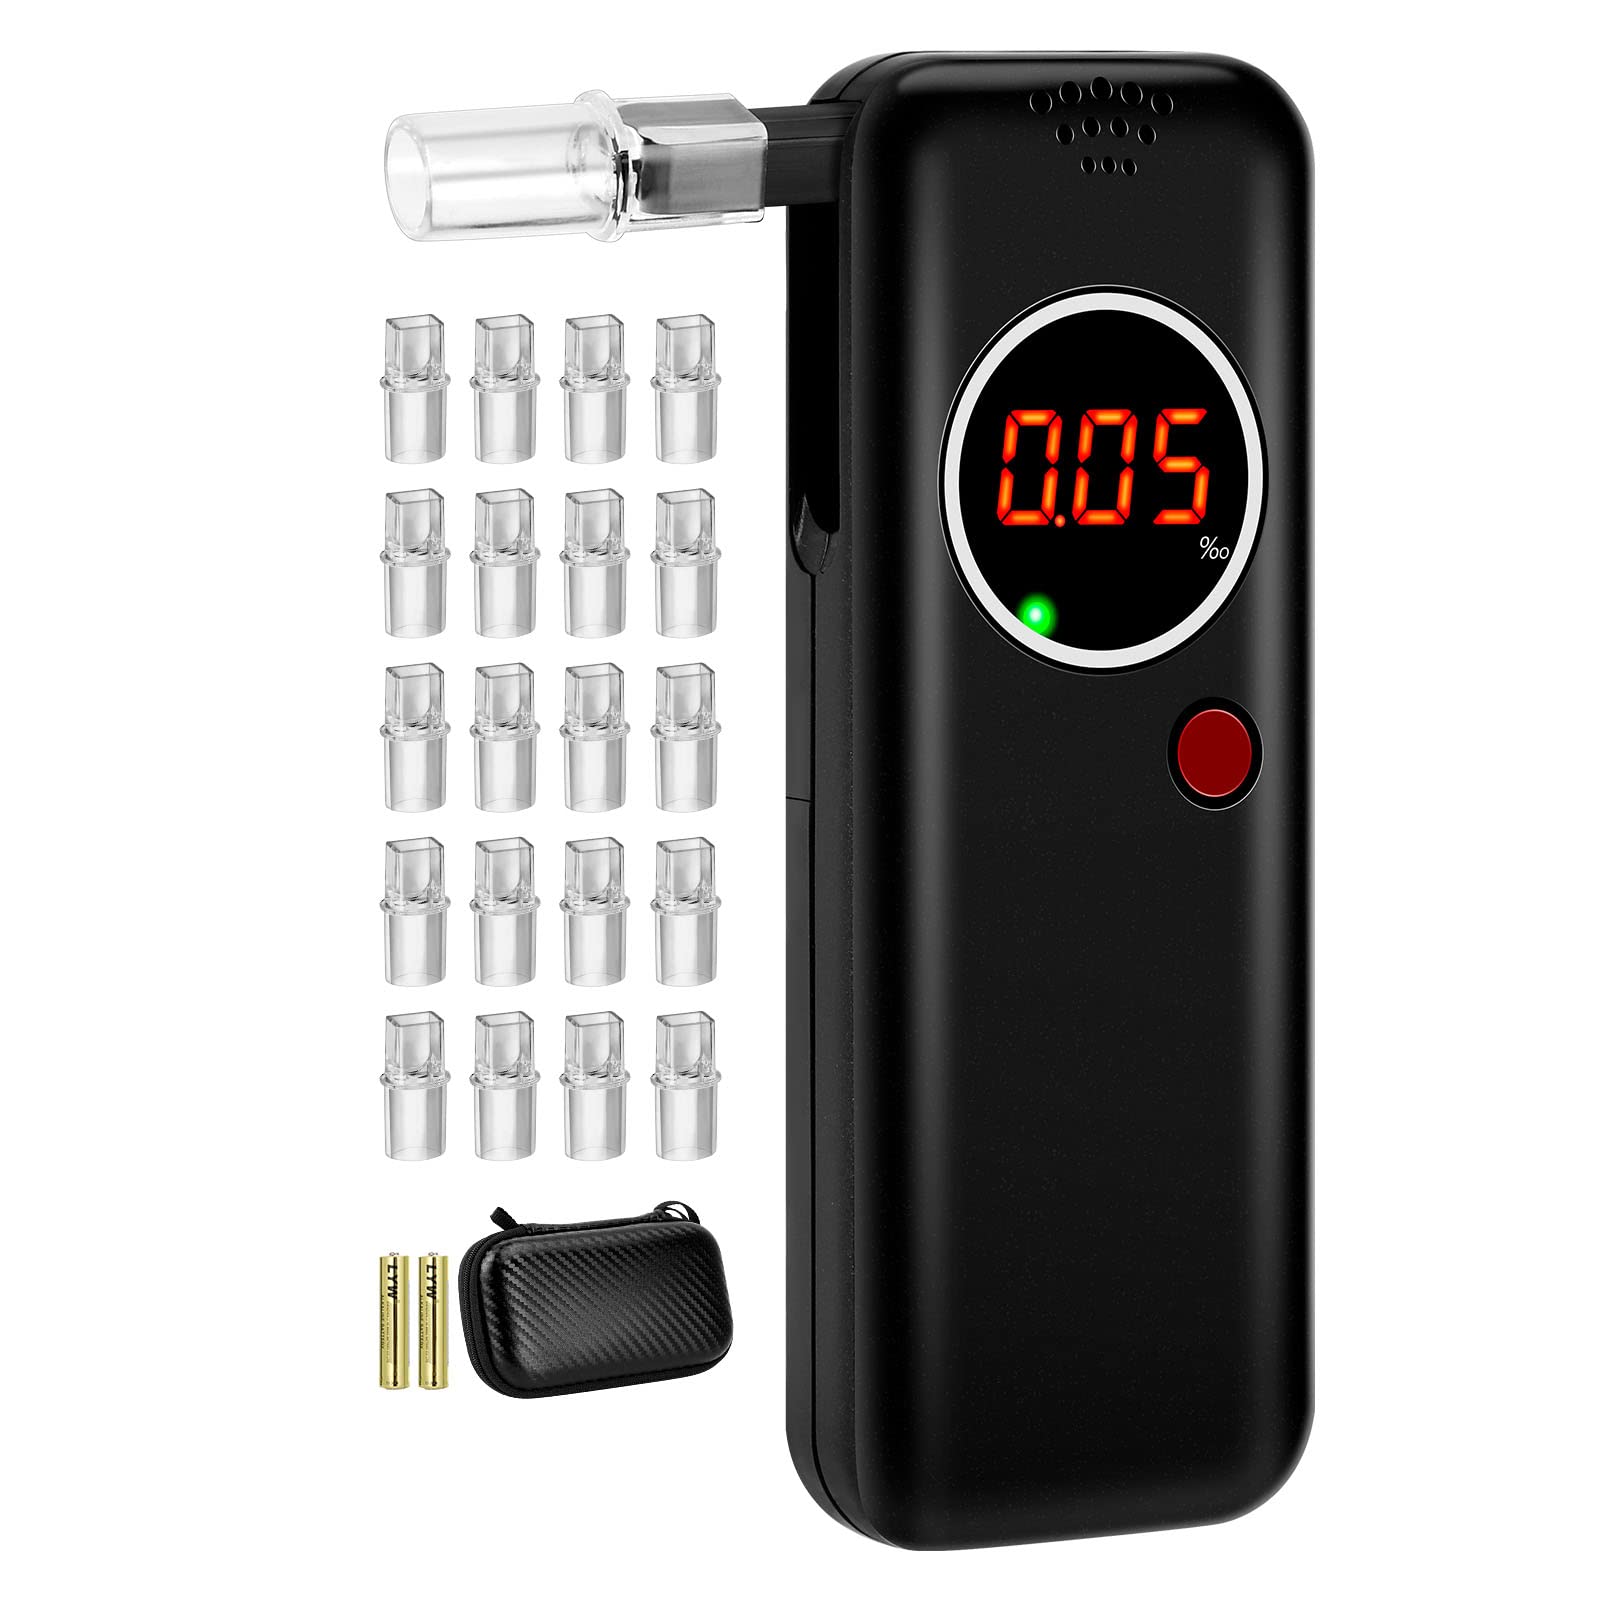 VPOW Alcohol Breathalyzer UK Breathalyser Tester: Alcohol Tester with 10Pcs  Mouthpieces - High Accuracy Alcohol Breath Tester with Digital LCD Screen